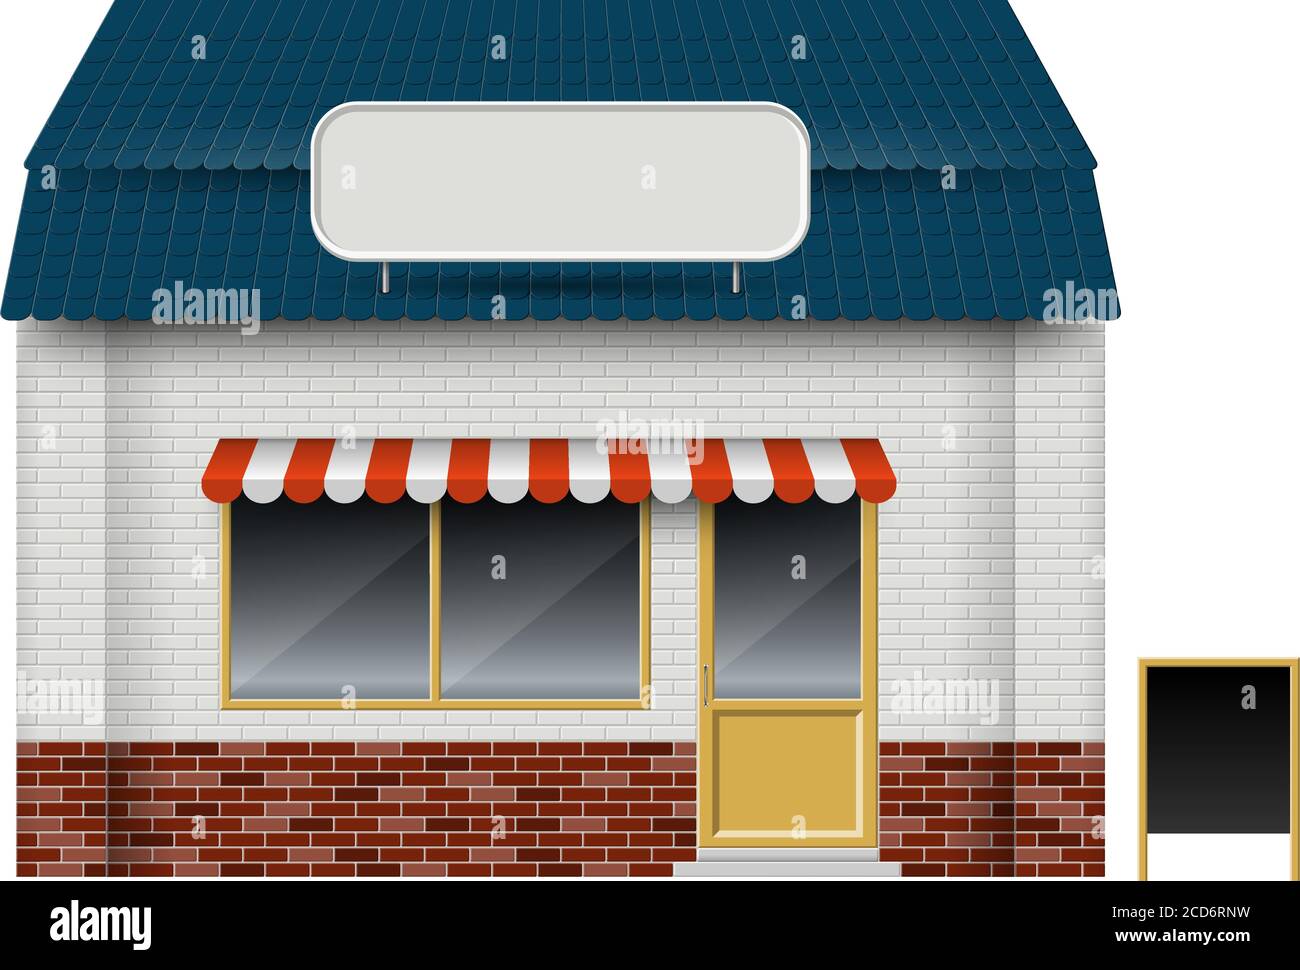 Store or cafe front view on white background. Isolated vector illustration of exterior facade building Stock Vector